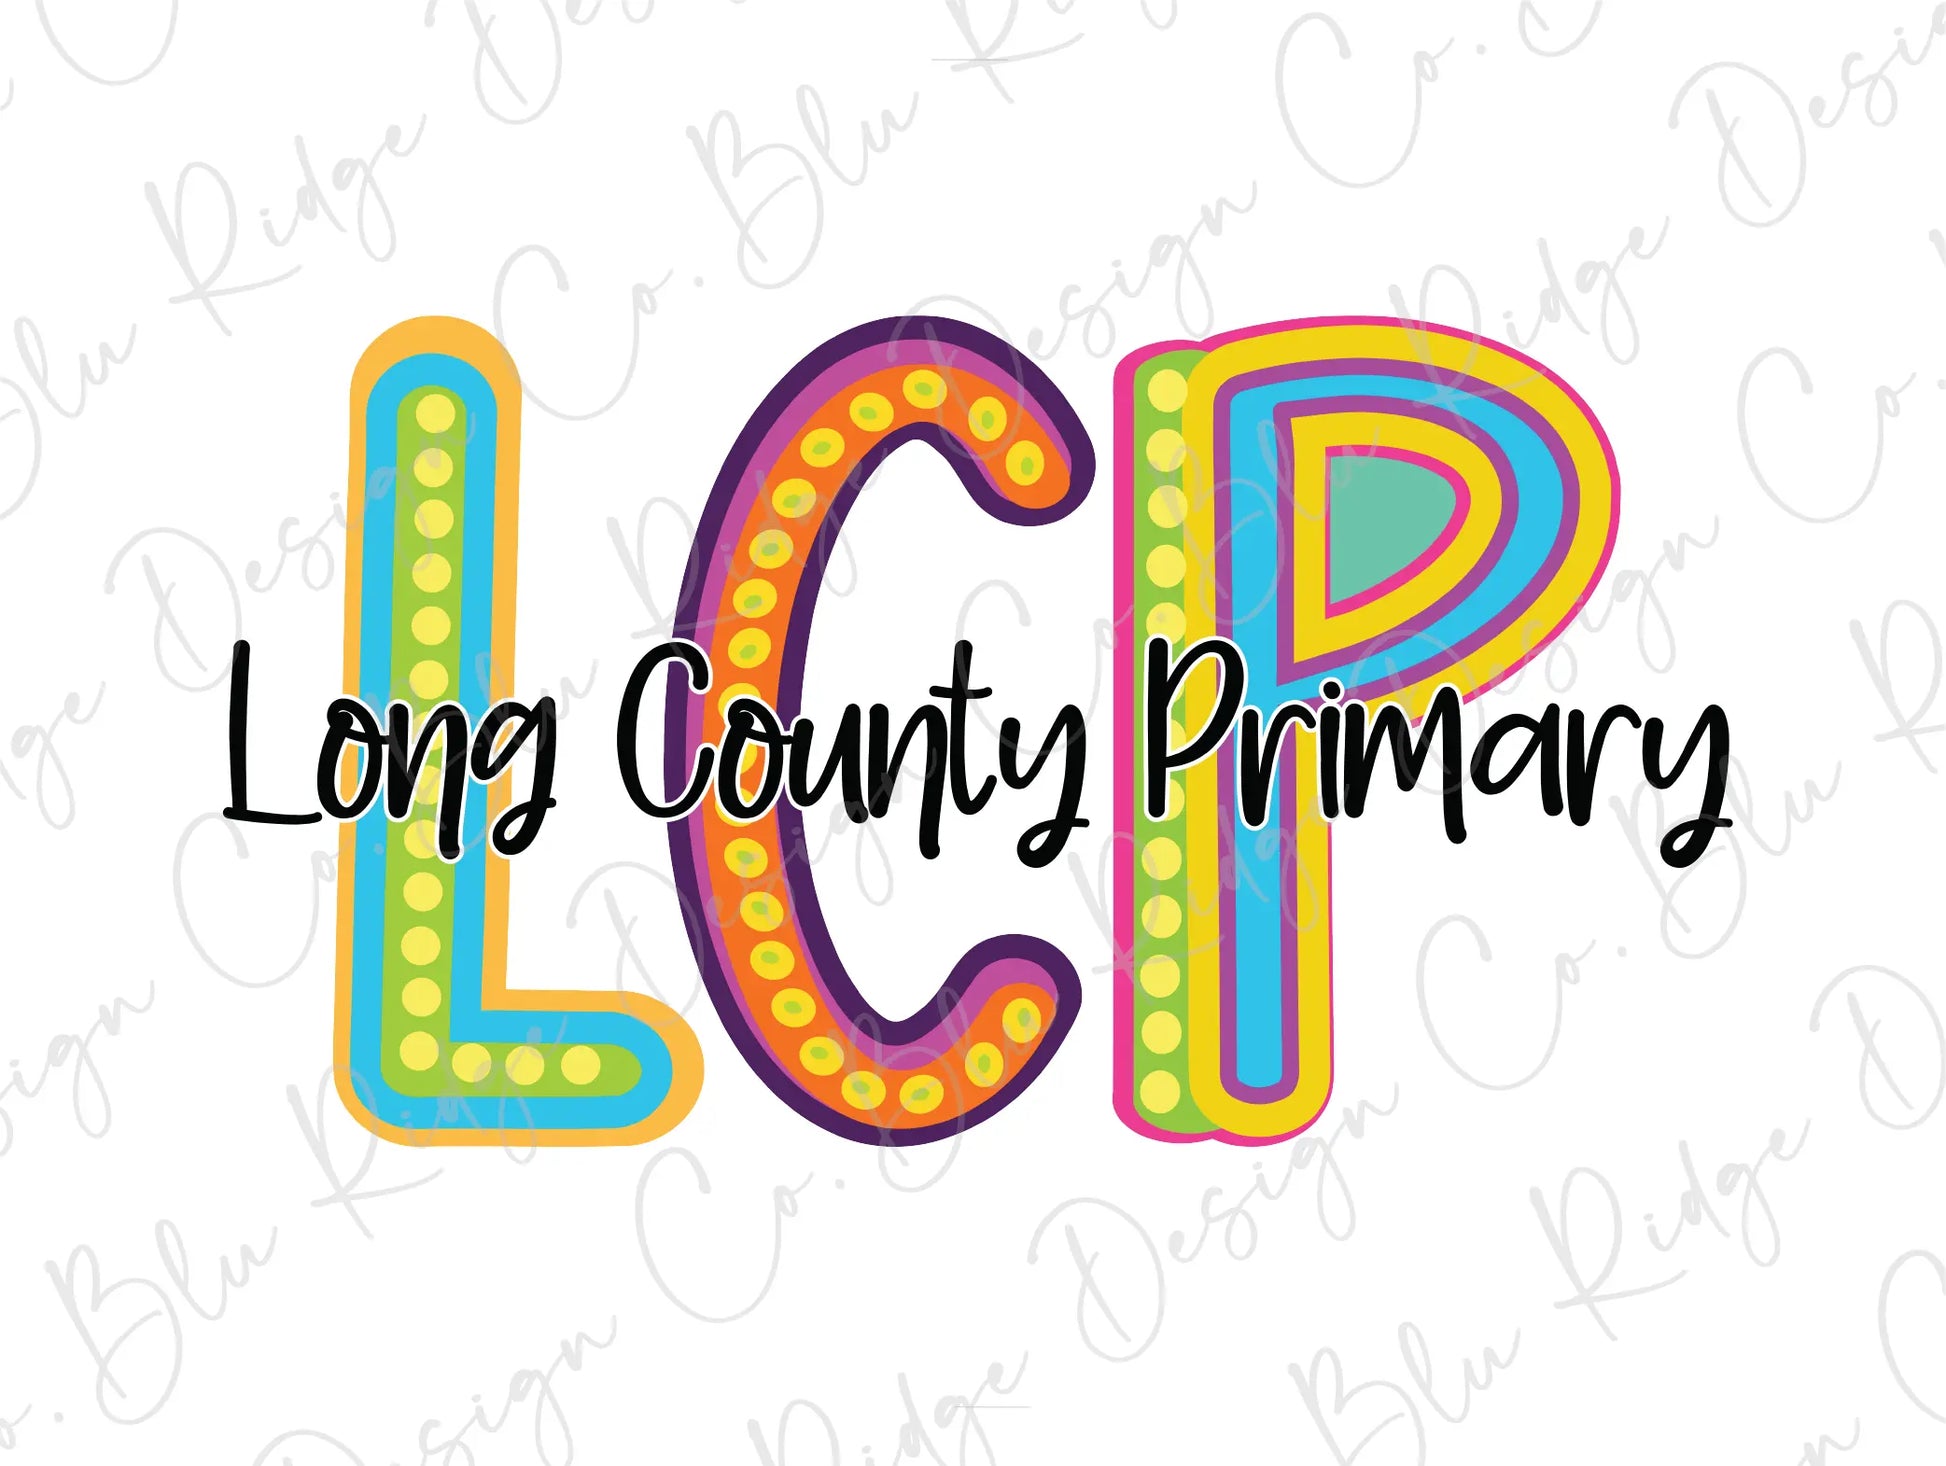 the long county primary primary logo